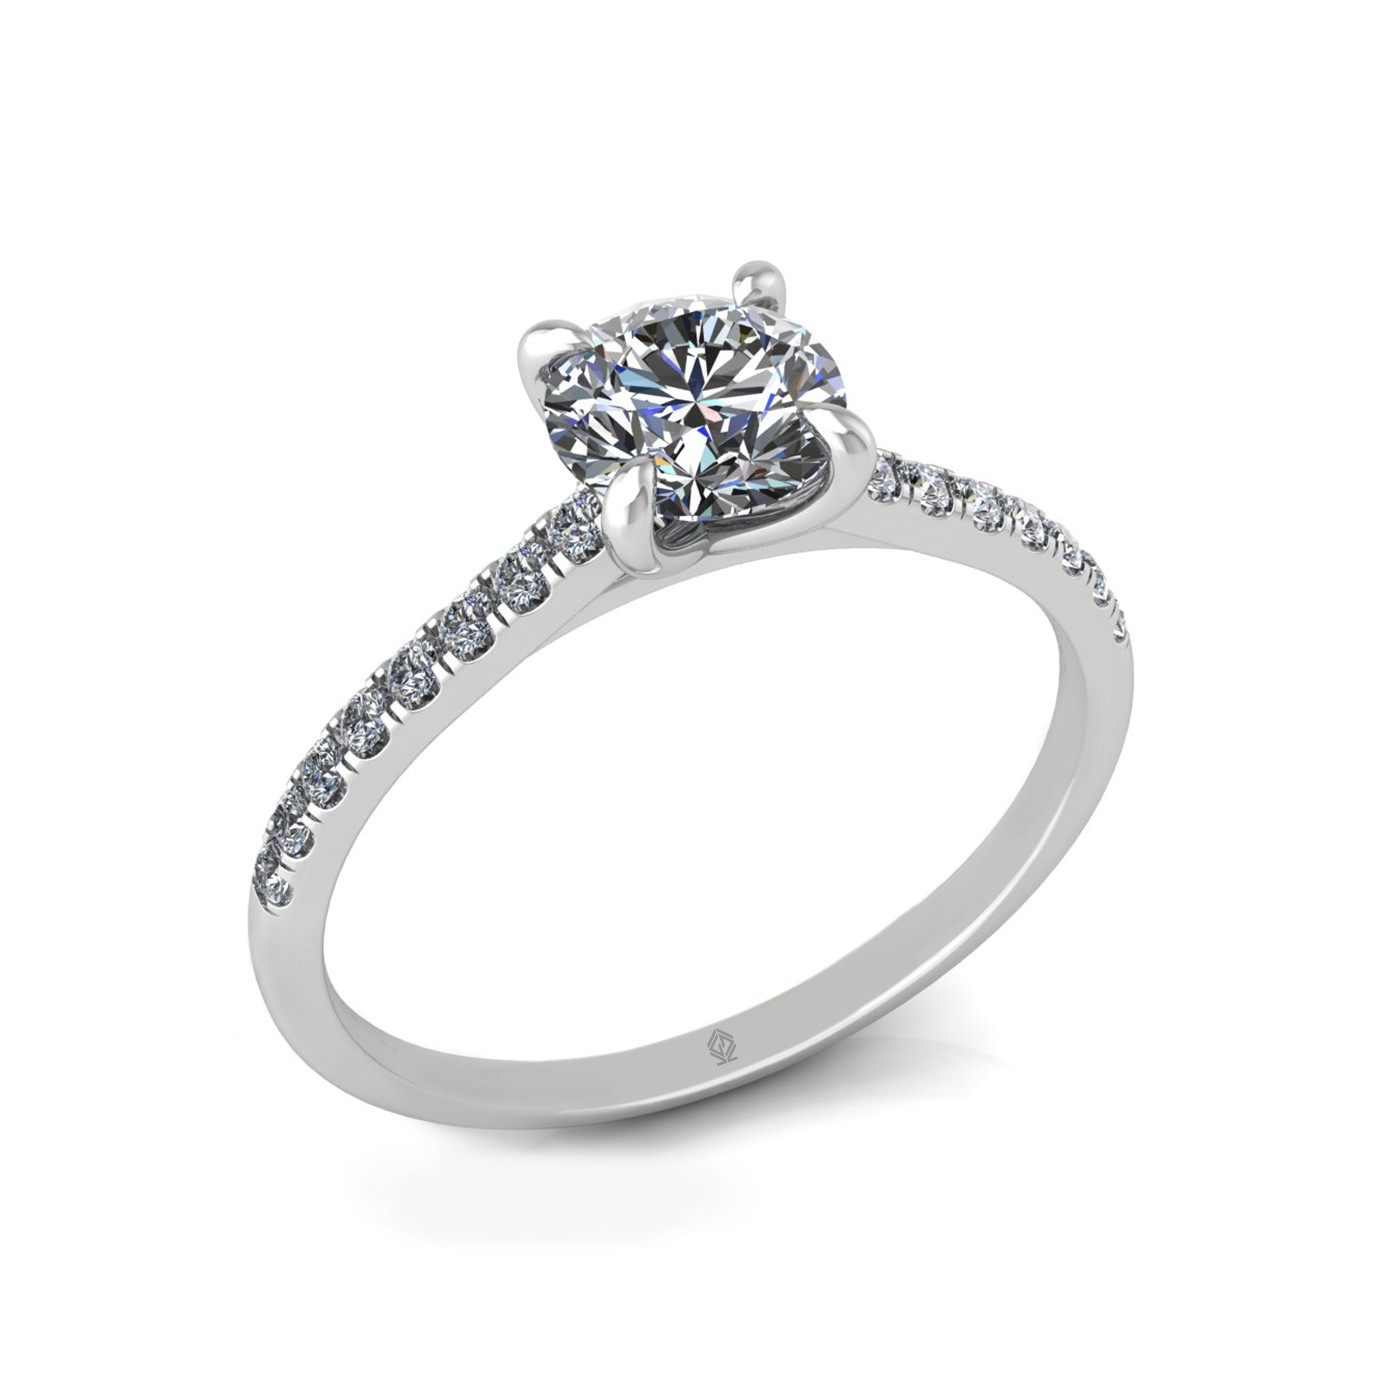 18k white gold 0,80 ct 4 prongs round cut diamond engagement ring with whisper thin pavÉ set band